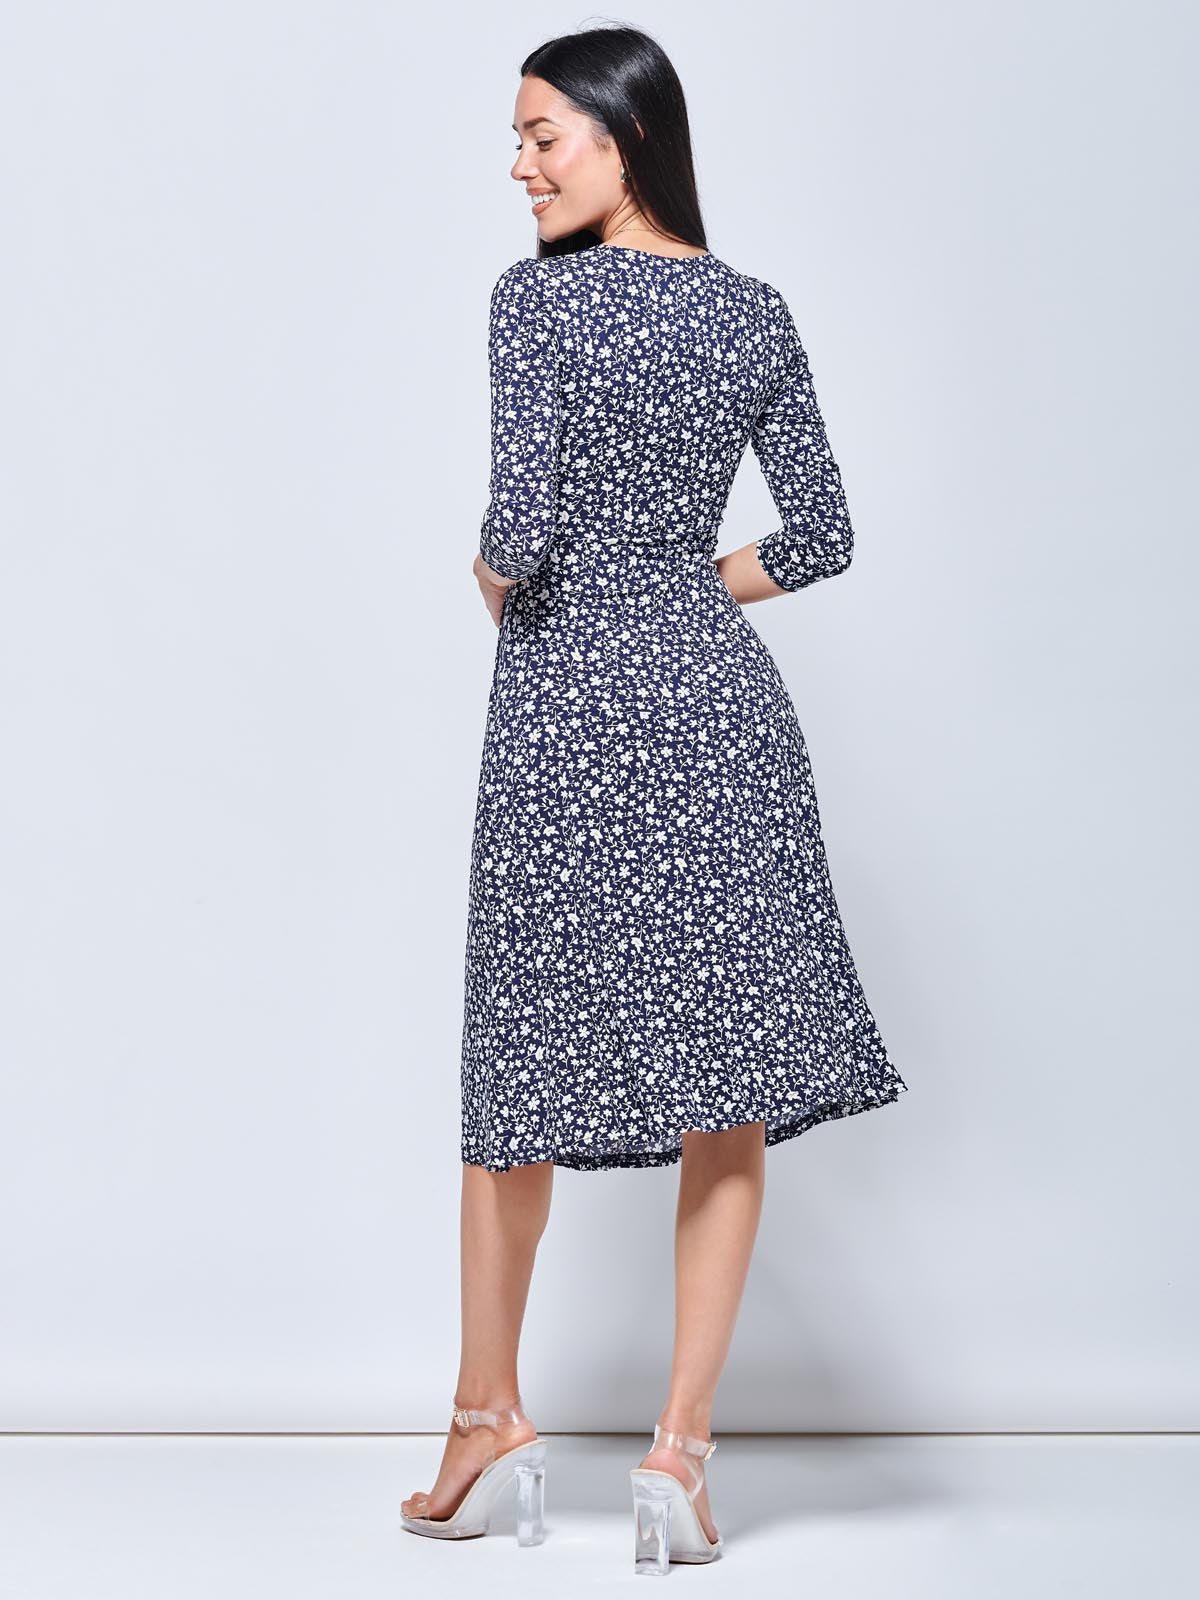 Gretta Jersey Fit & Flare Dress, Navy Floral